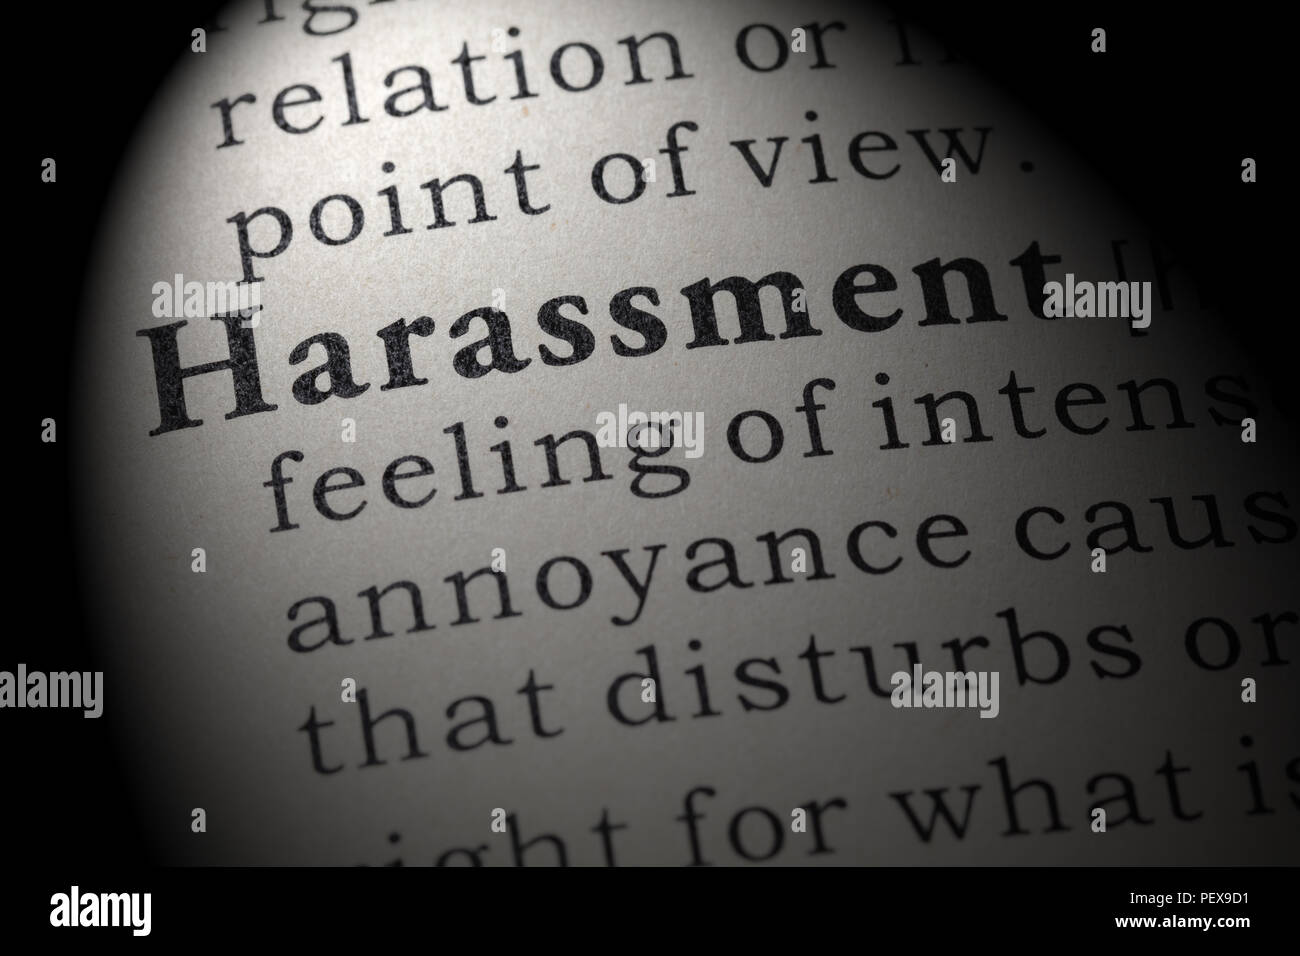 Fake Dictionary, Dictionary definition of the word harassment. including key descriptive words. Stock Photo